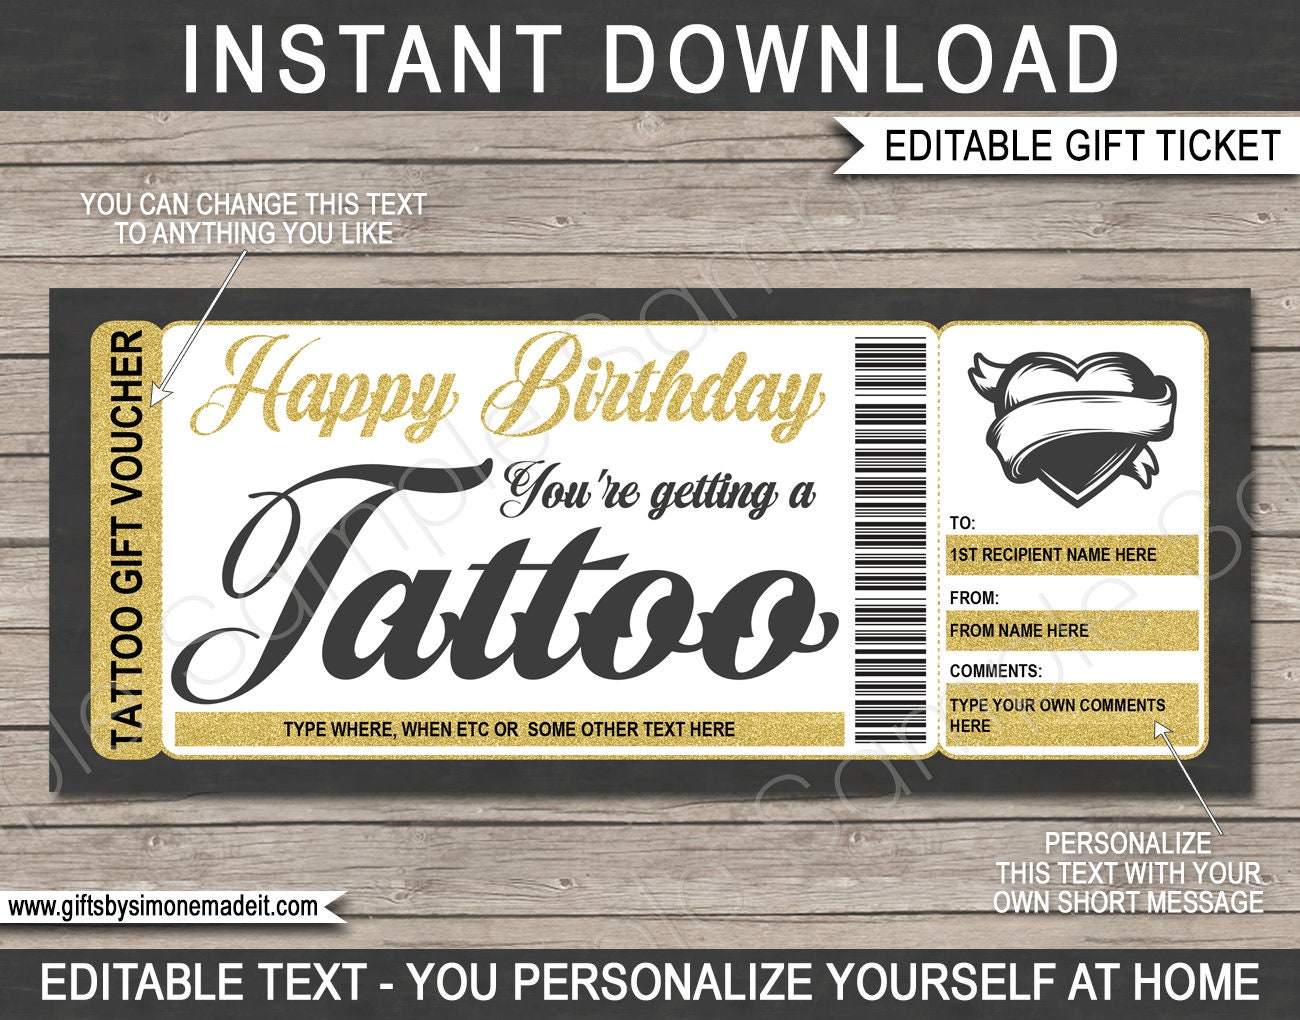 Tattoo Certificate Template Birthday Gift Card Voucher Ticket Printable  Card Coupon - Heart Design - Get Inked - EDITABLE TEXT DOWNLOAD Inside Tattoo Gift Certificate Template